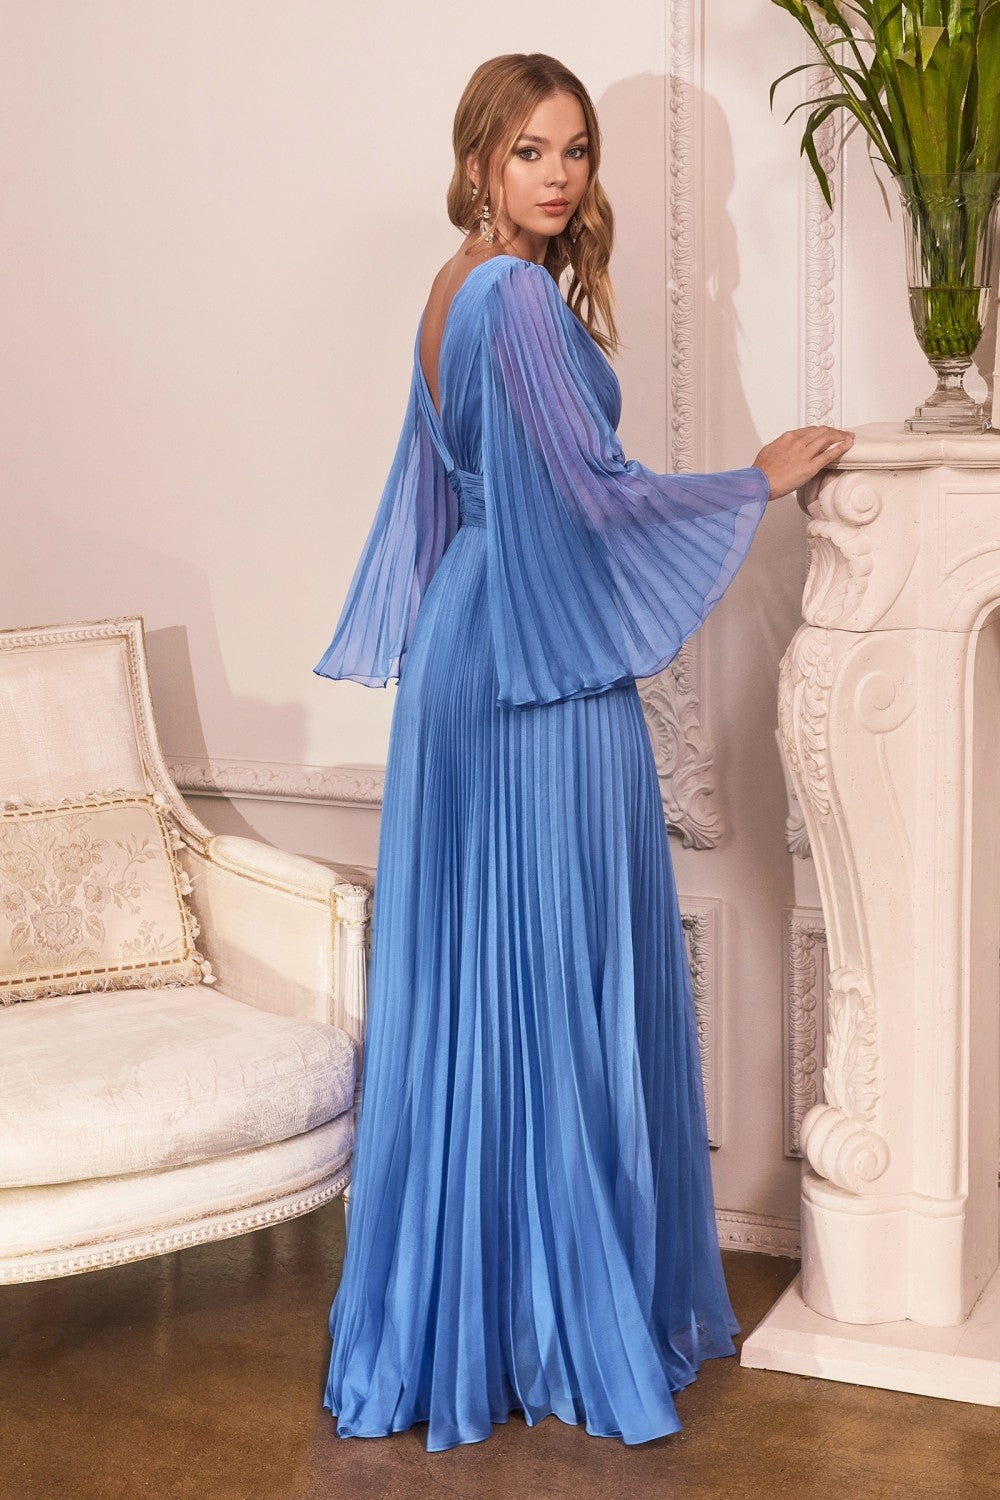 Pleated Chiffon Prom & Ball Gown Deep v-neckline Bodice with Open Back and Covered Shoulders Fairy Mother of the Bride Dress CDCD242 Elsy Style Bridesmaid Dress